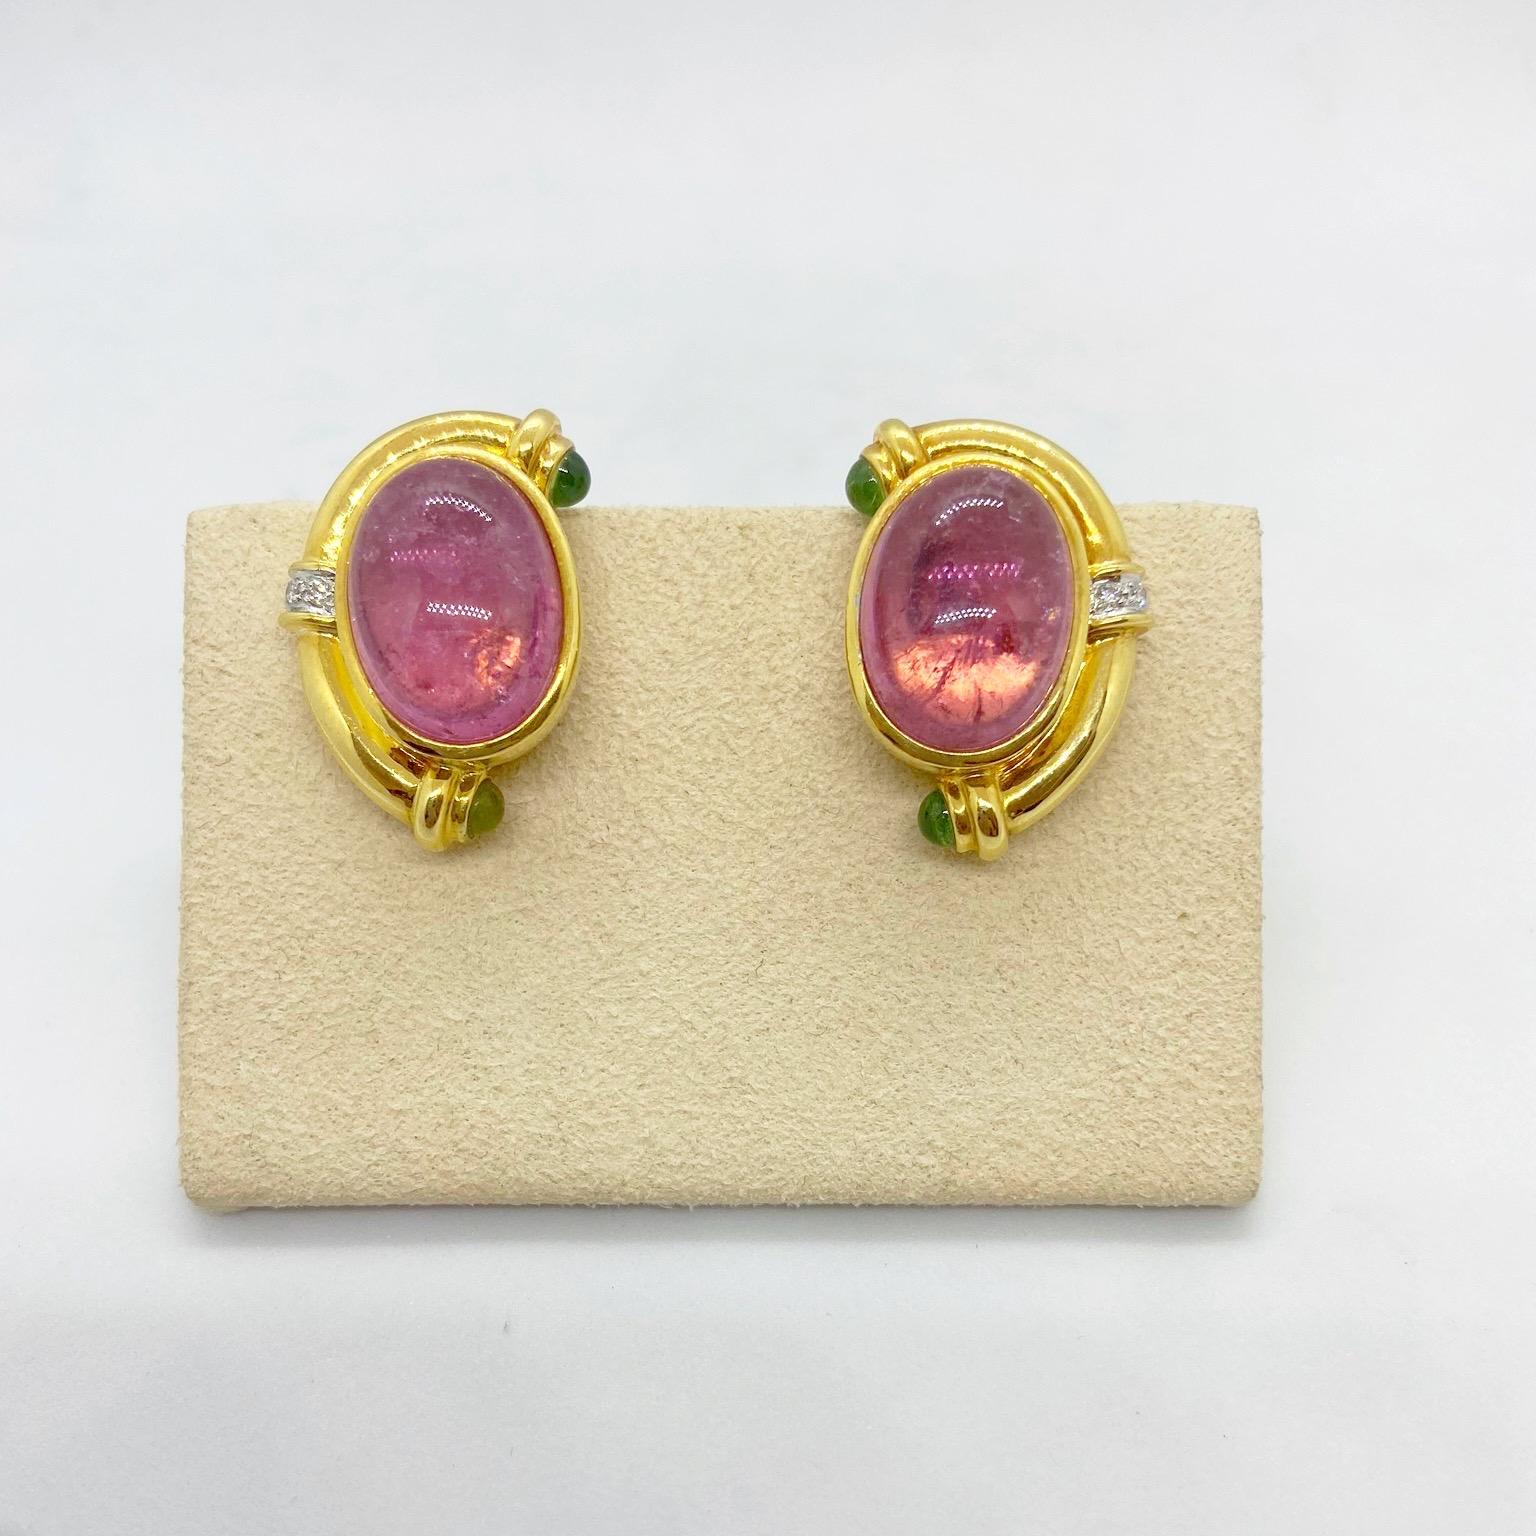 These earrings center large oval Pink Tourmaline Cabochons in a polished 18 karat yellow gold setting. The earrings are accented with Diamonds and Green Tourmaline Cabochons.T hey measure 1 1/8